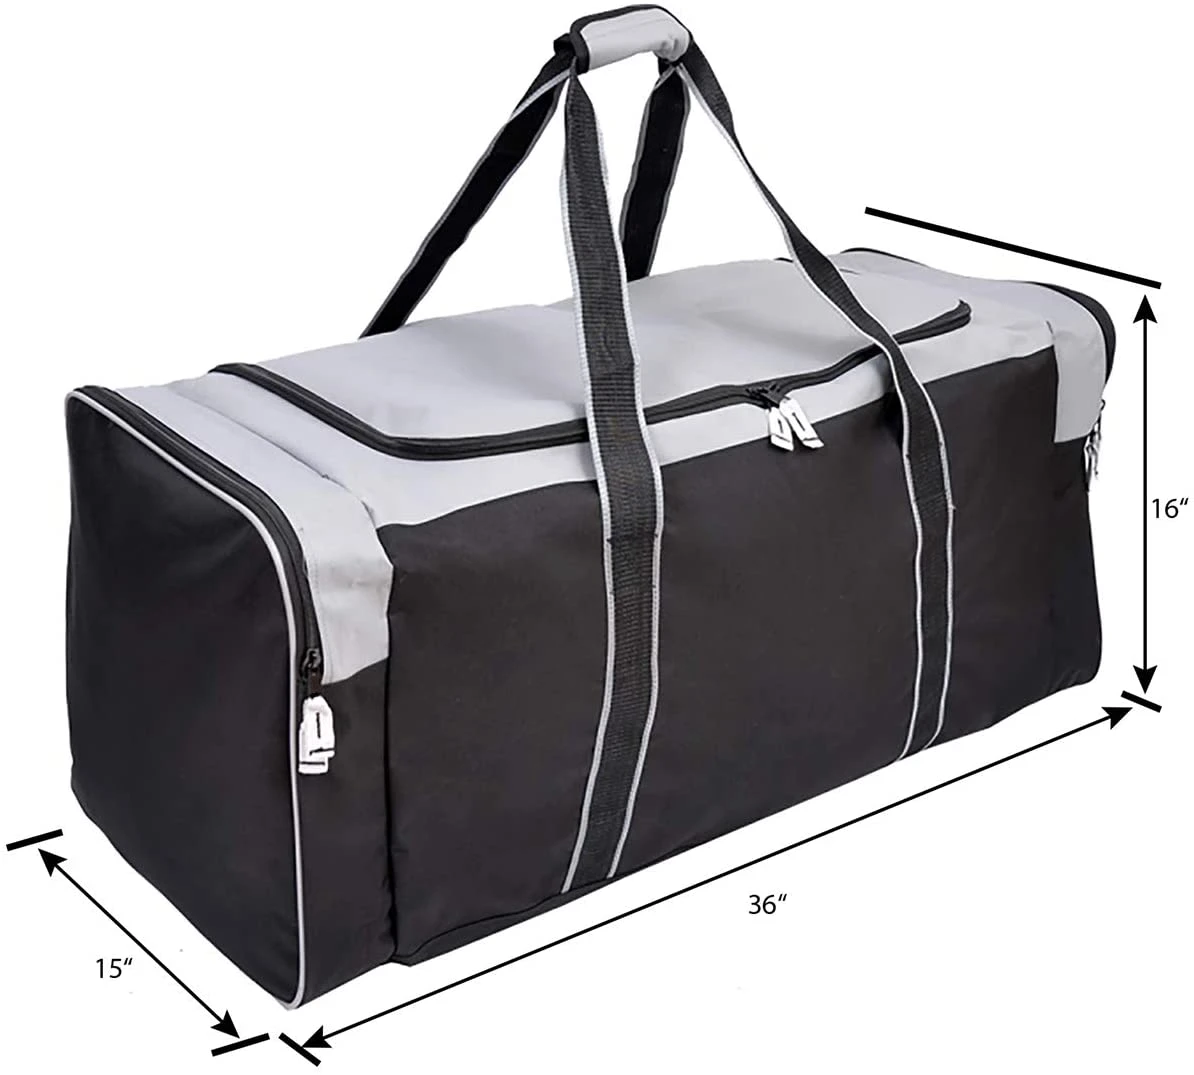 Hot sale high quality large capacity Multipurpose Equipment Duffel bag tote travel bag with 3 pockets